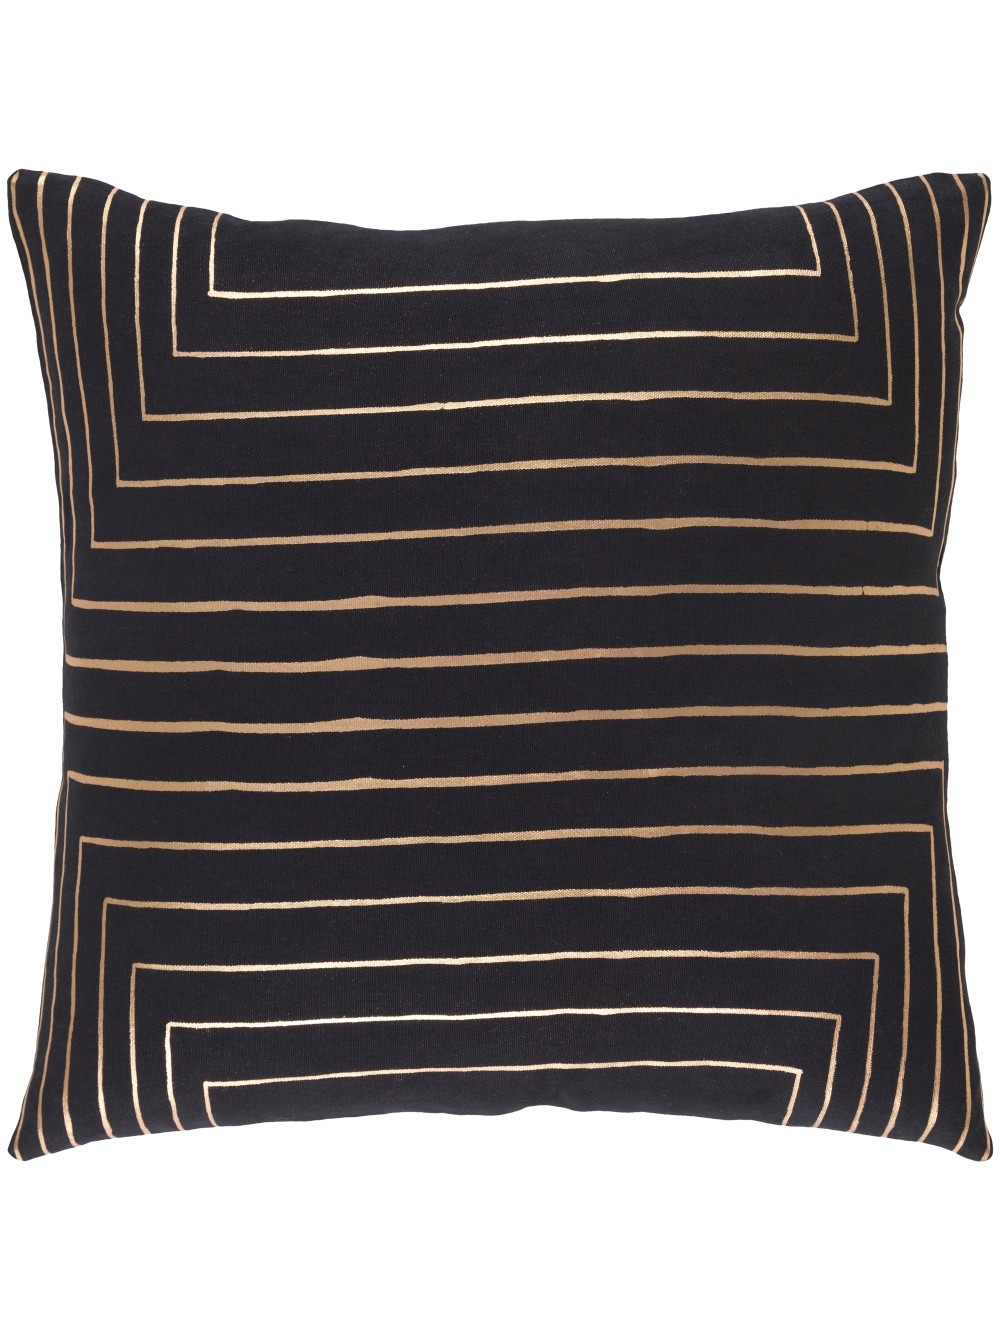 PARALLELS PILLOW, BLACK - Polyester Filled - Image 0